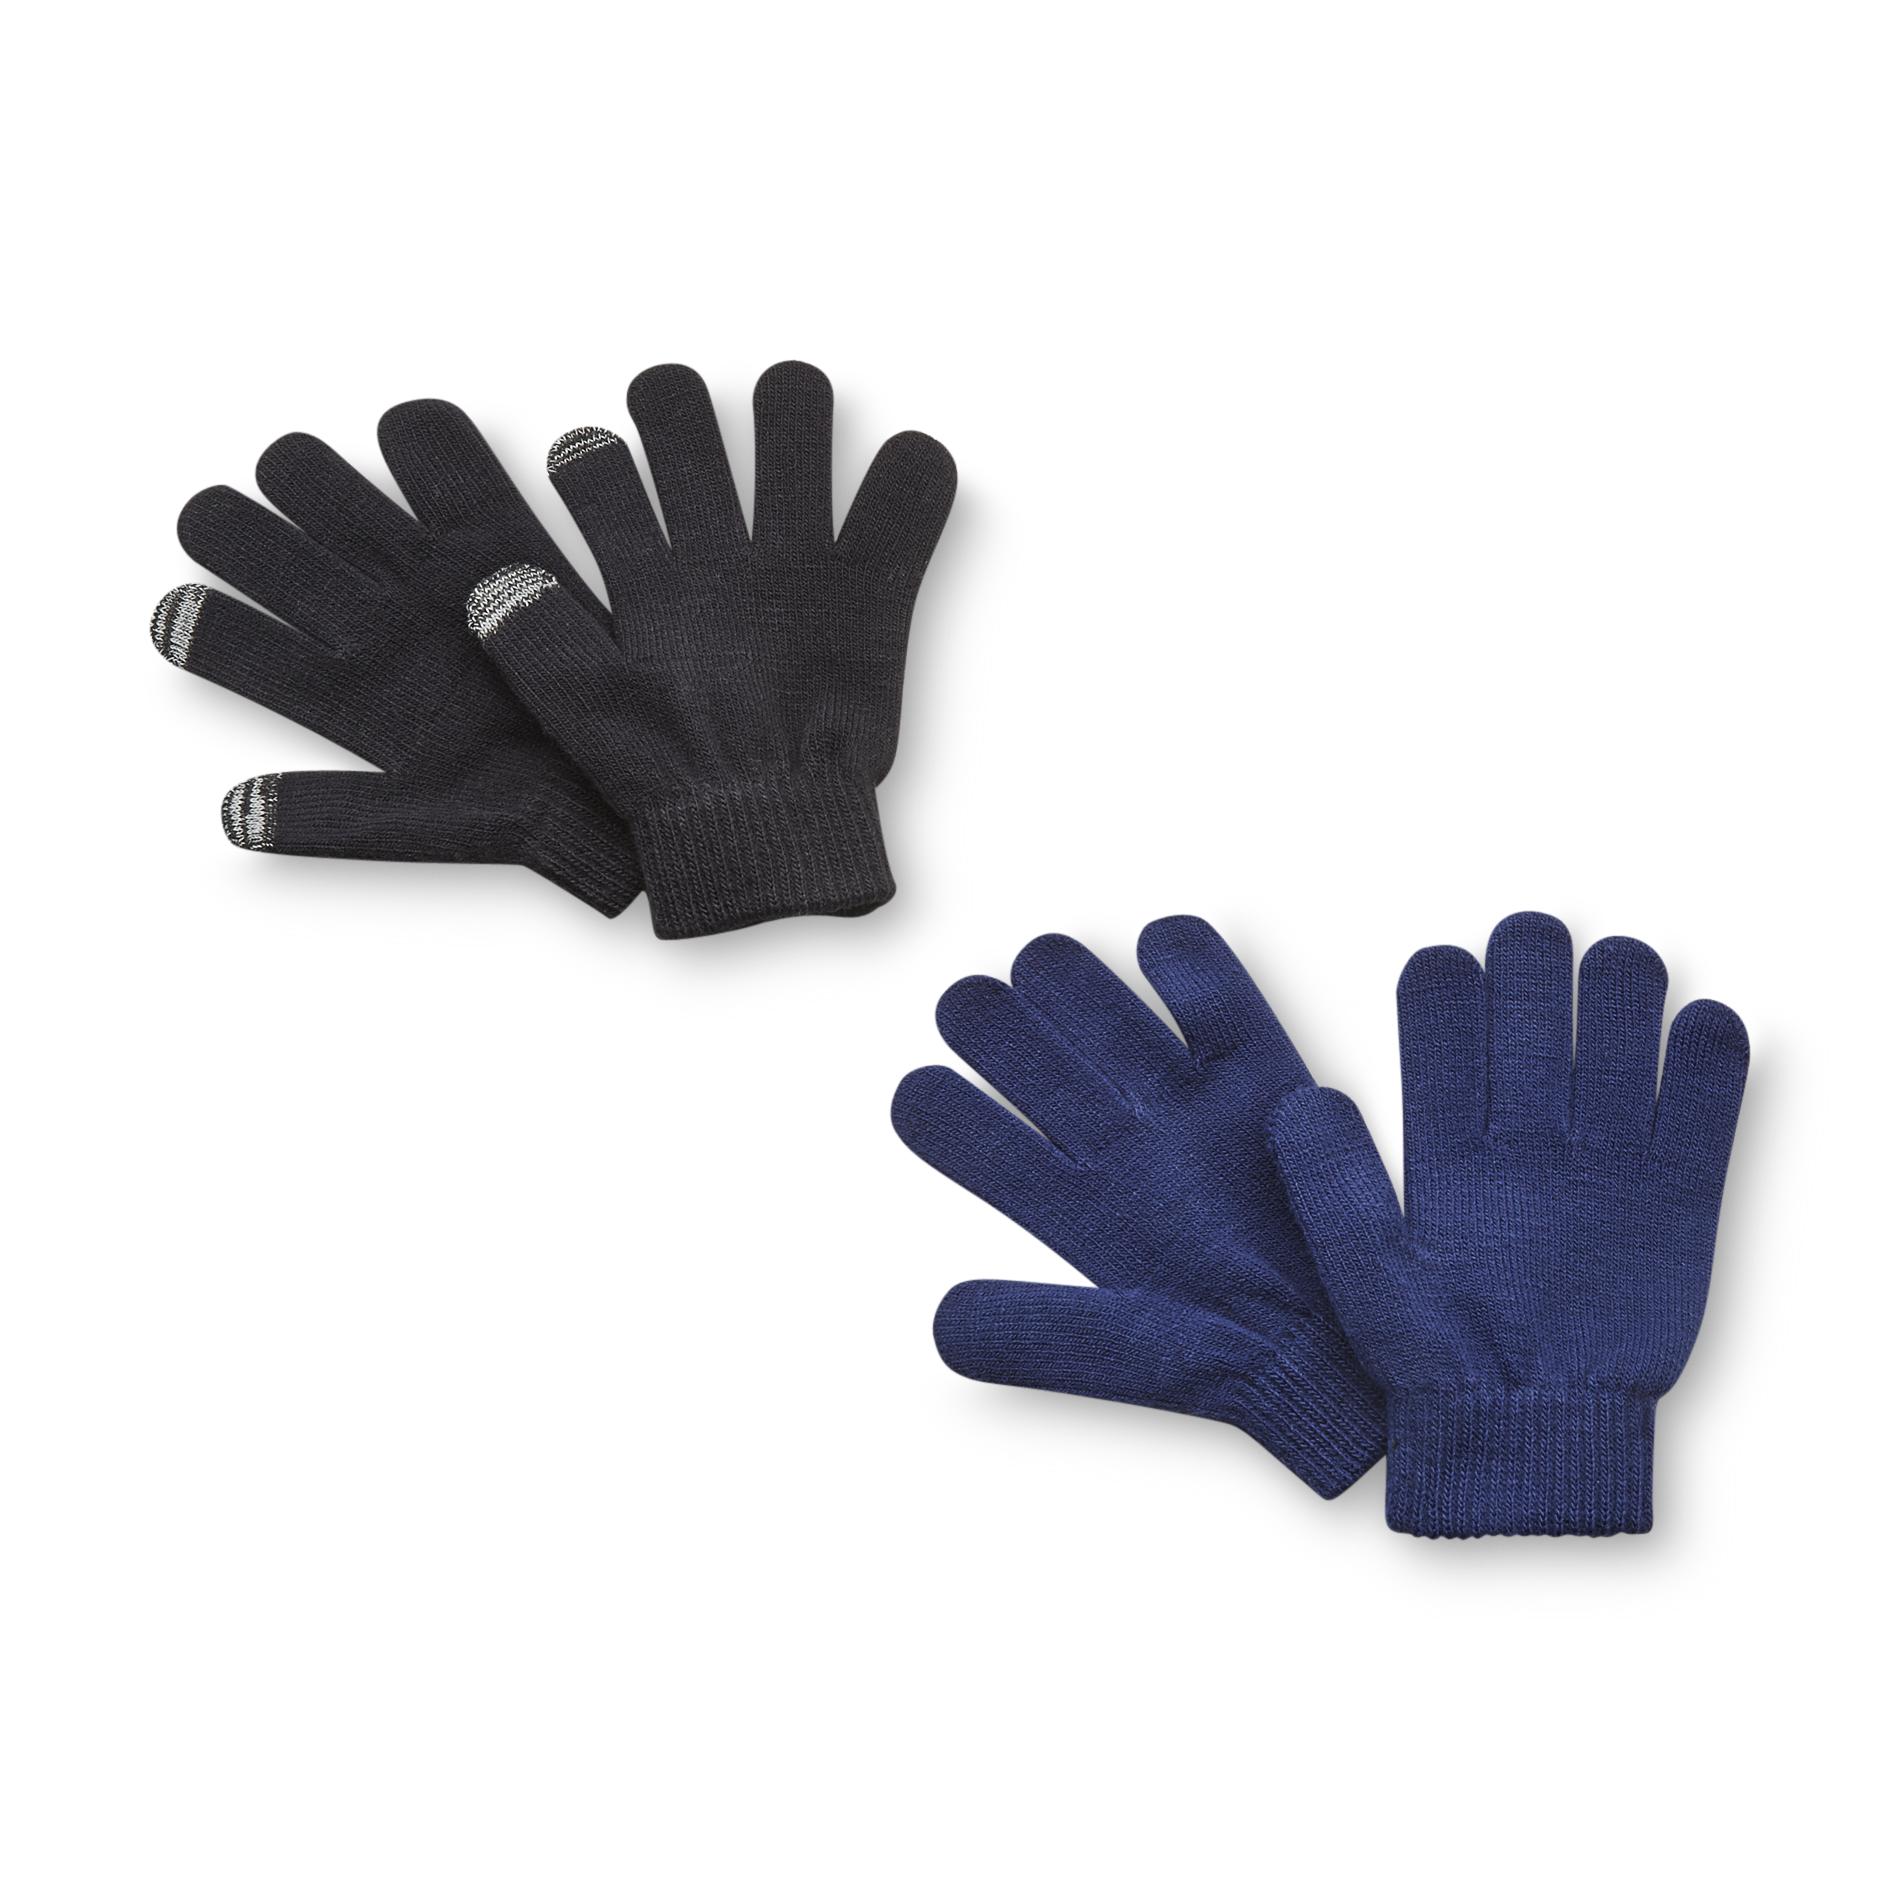 Athletech Boy's 2-Pairs Stretch Knit Gloves - Texting